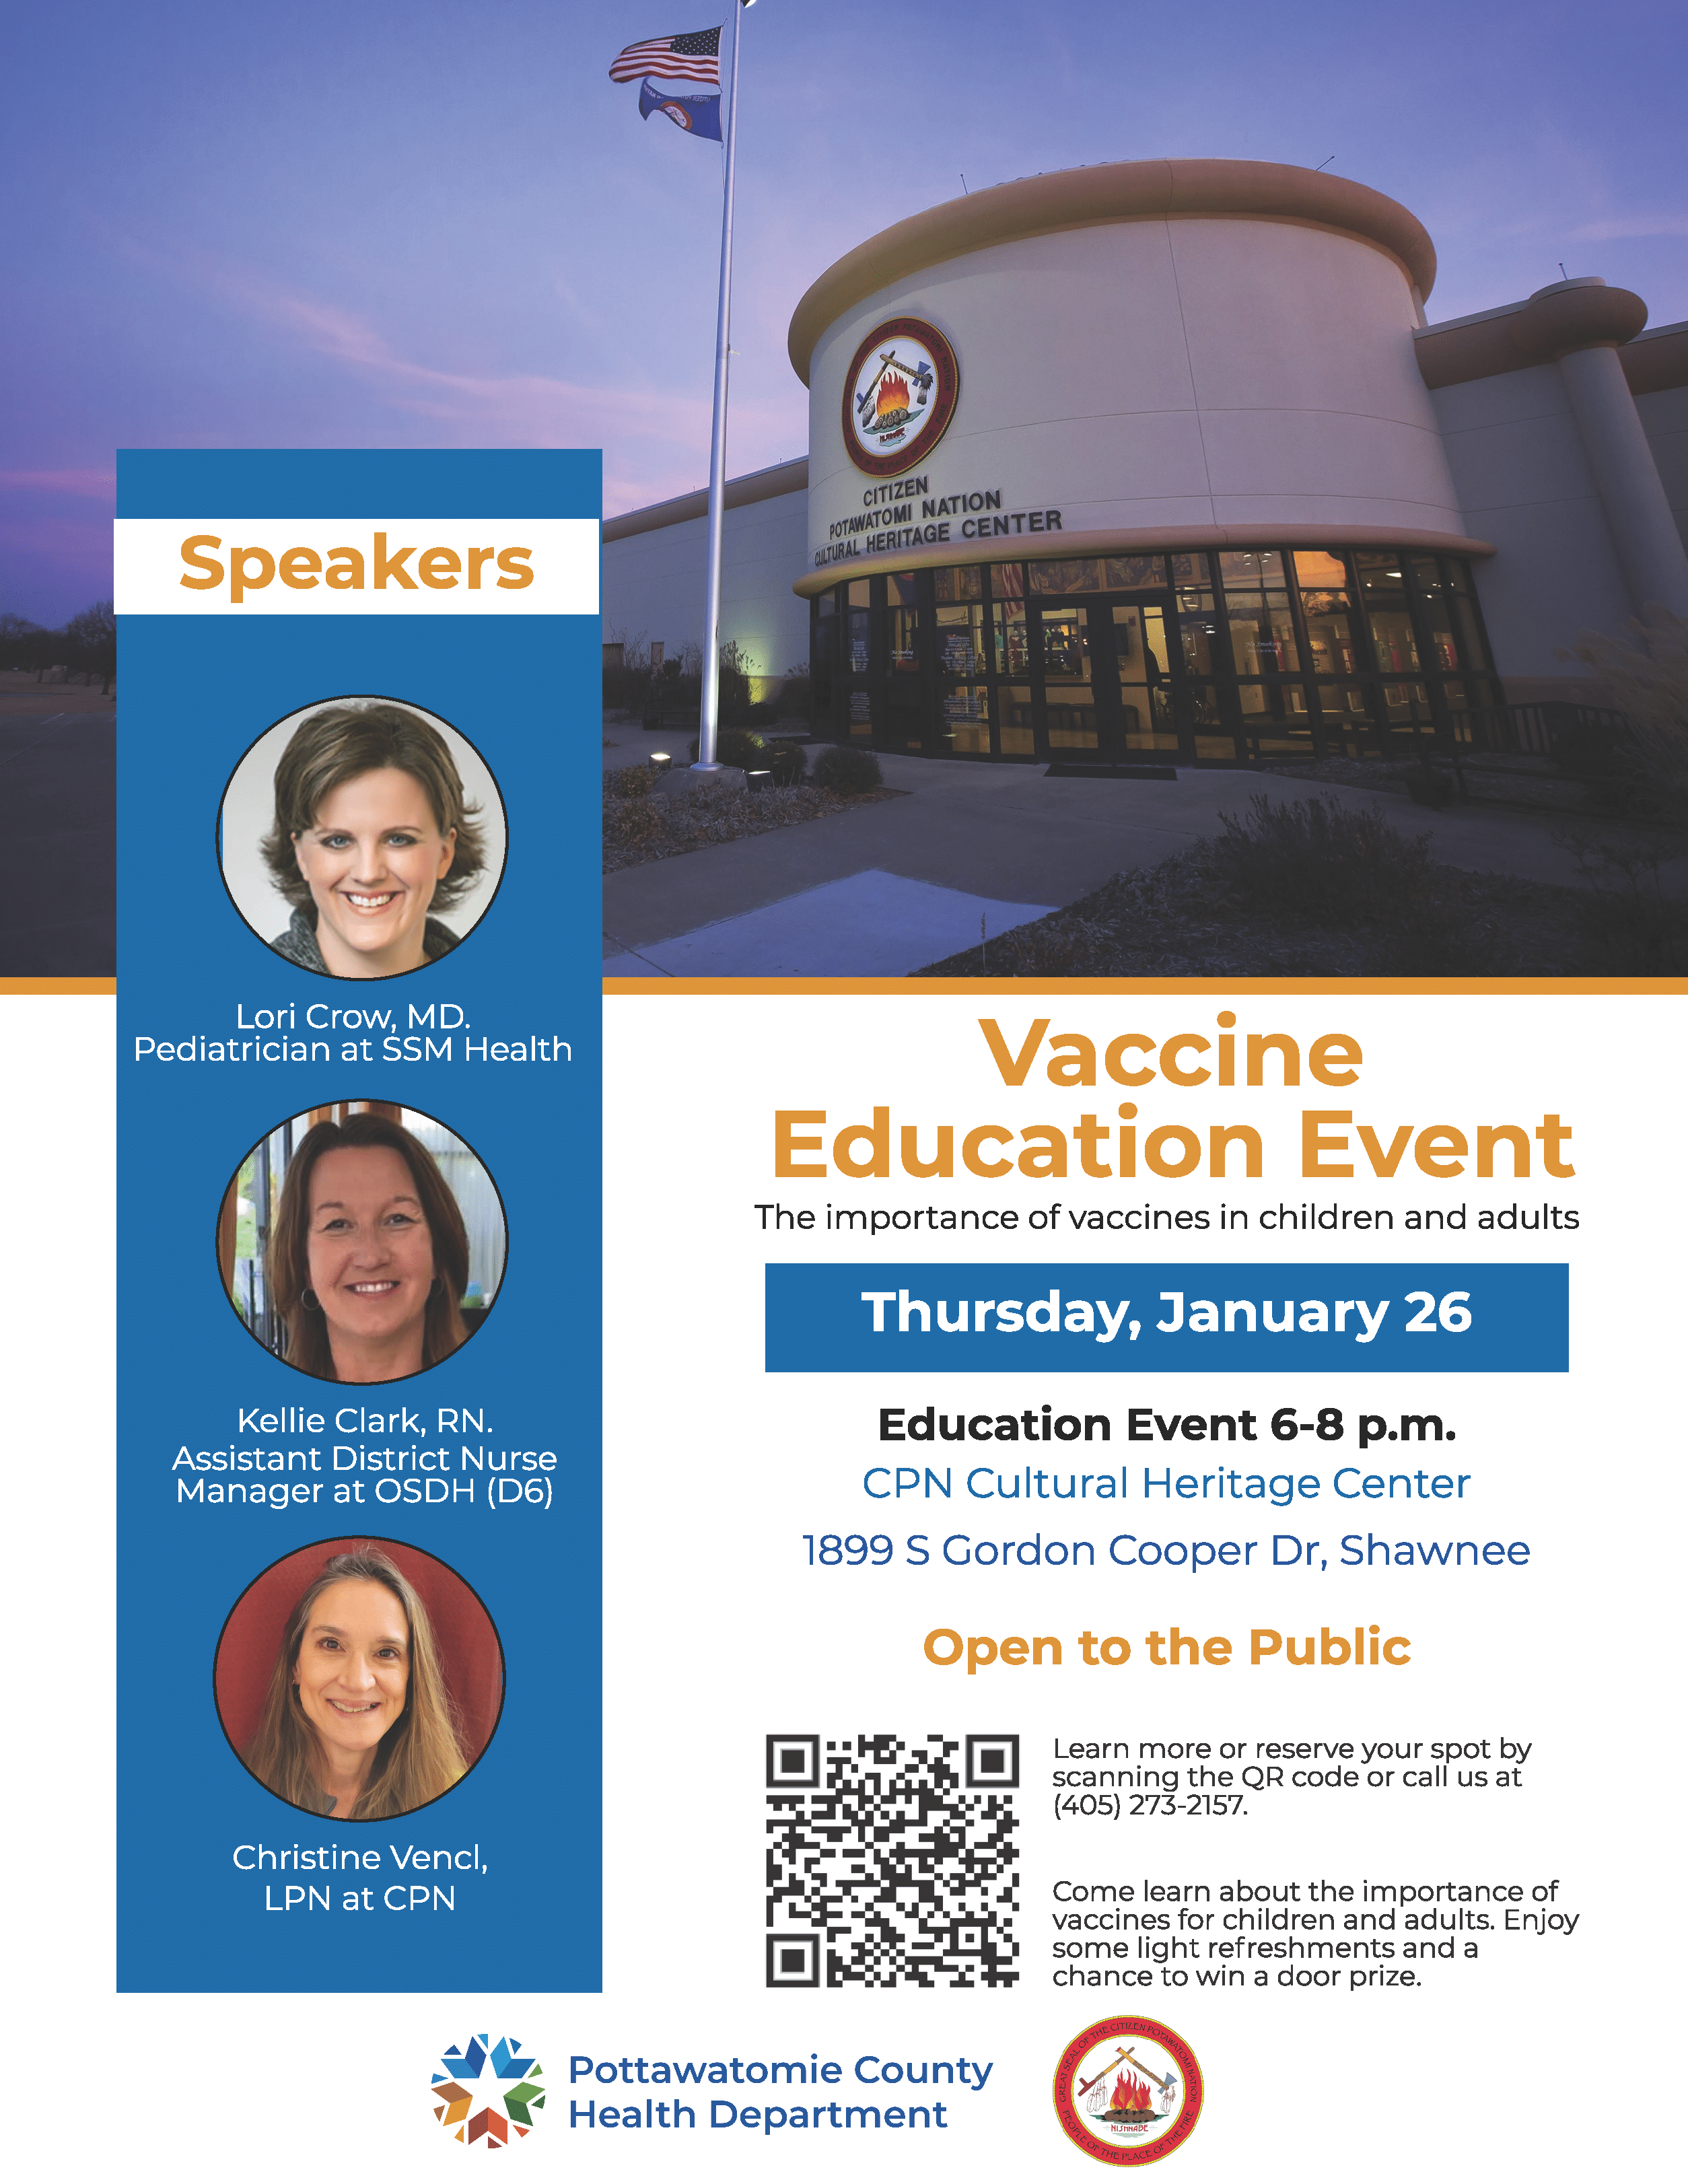 This event on January 26, 2023, from 6-8 p.m. by Citizen Potawatomi Nation and the Pottawatomie County Health Department will address the importance of vaccines in children and adults. Speakers include Lori Crow, MD, Pediatrician at SSM Health; Kellie Clark, RN, Assistant District Nurse Manager at OSDH (D6); and Christine Venci, LPN, Citizen Potawatomi Nation. The event is open to the public, and will include some light refreshments and a chance to win a door prize. Register online or call 405-273-2157.